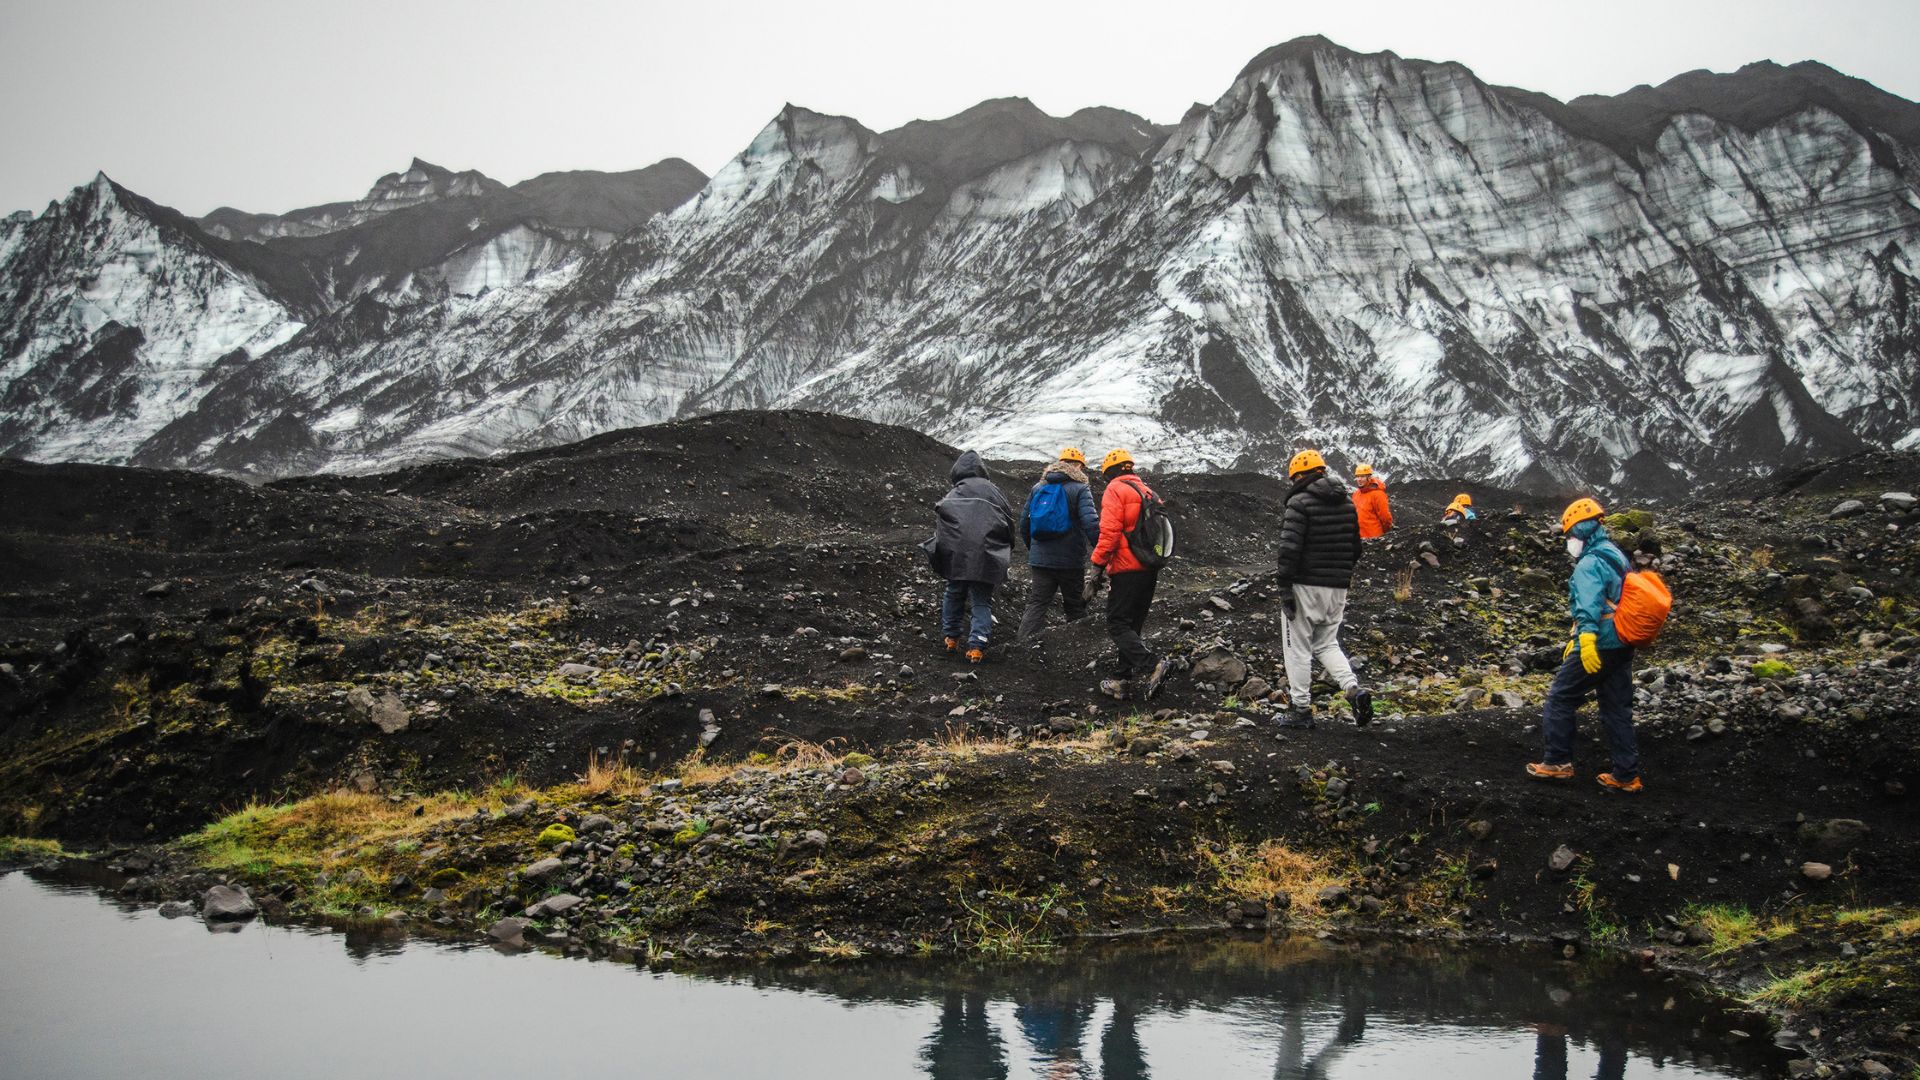 Glacier hike is one of the best attractions in Iceland